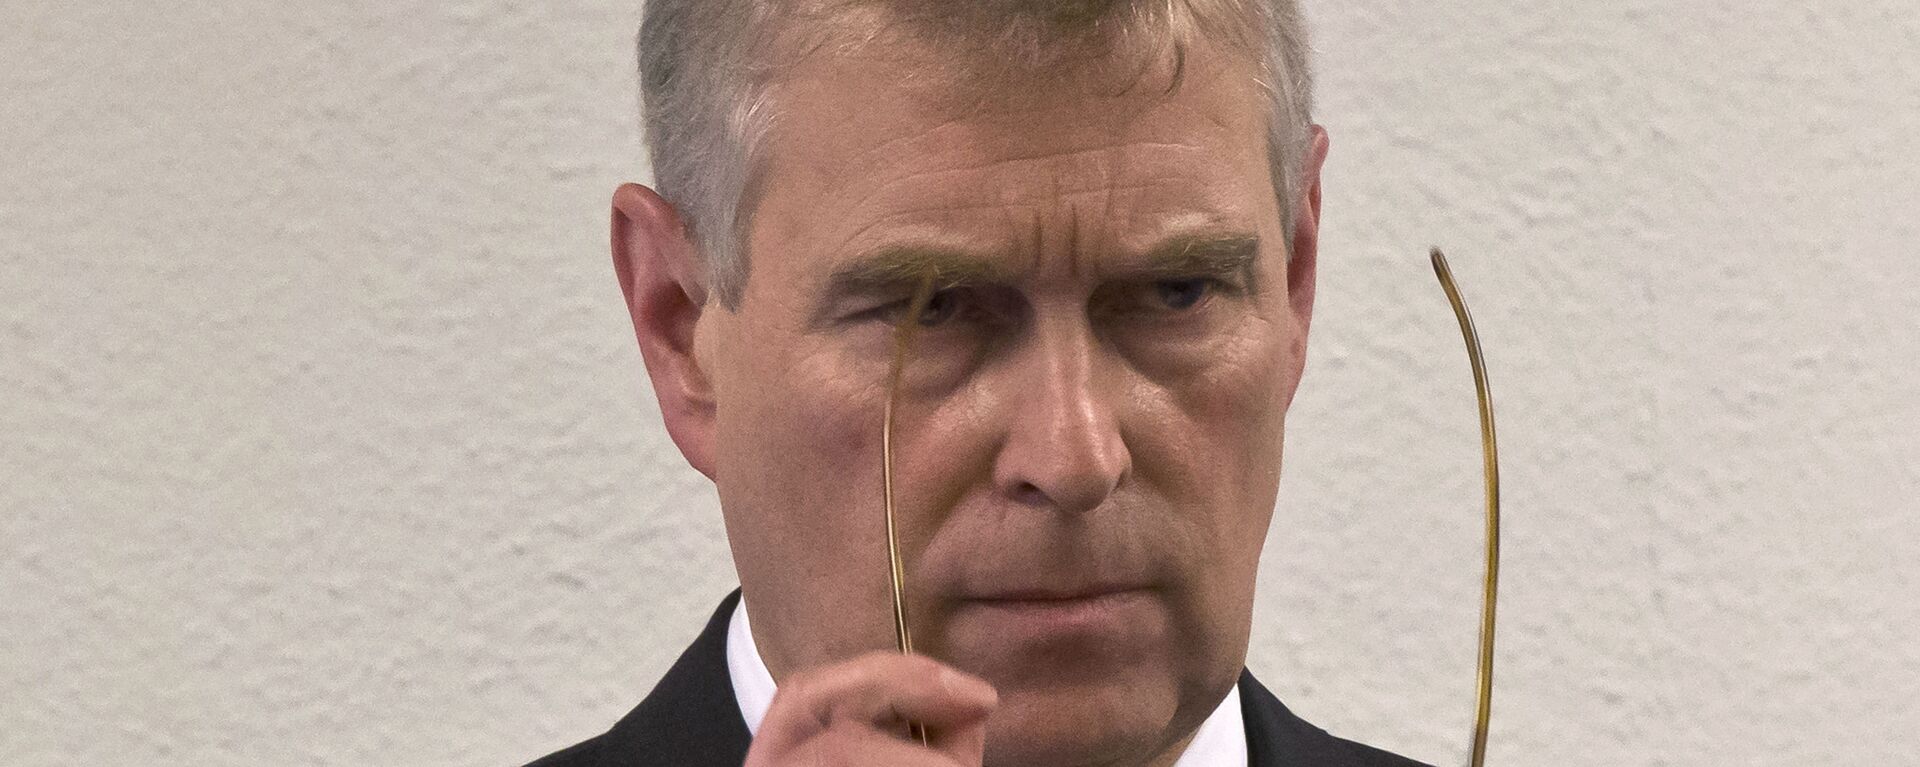 In this file photo dated Thursday, 22 January 2015, Britain's Prince Andrew puts on his glasses prior to his speech to business leaders during a reception on the sideline of the World Economic Forum in Davos.  - Sputnik International, 1920, 21.04.2021